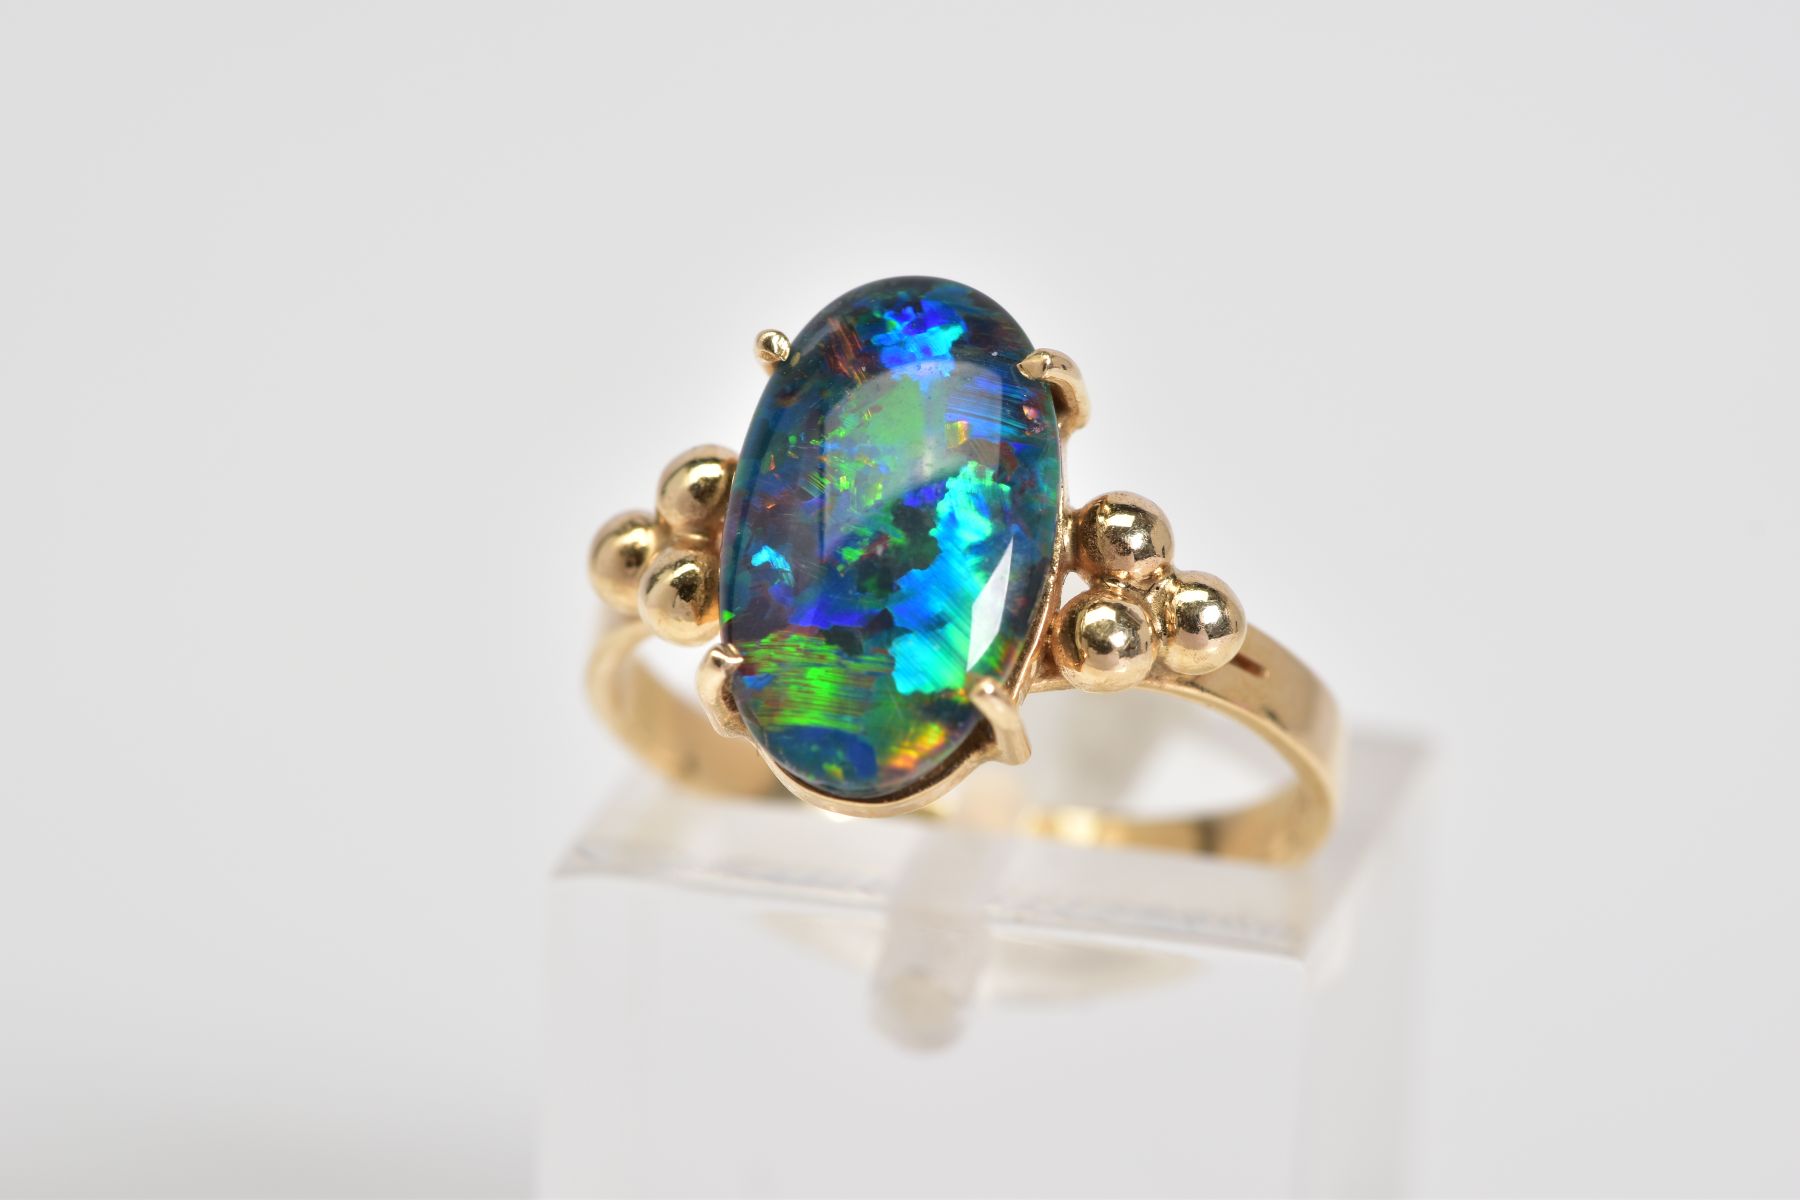 AN OPAL TRIPLET RING, the oval opal triplet set within a four claw setting, to the bead detail